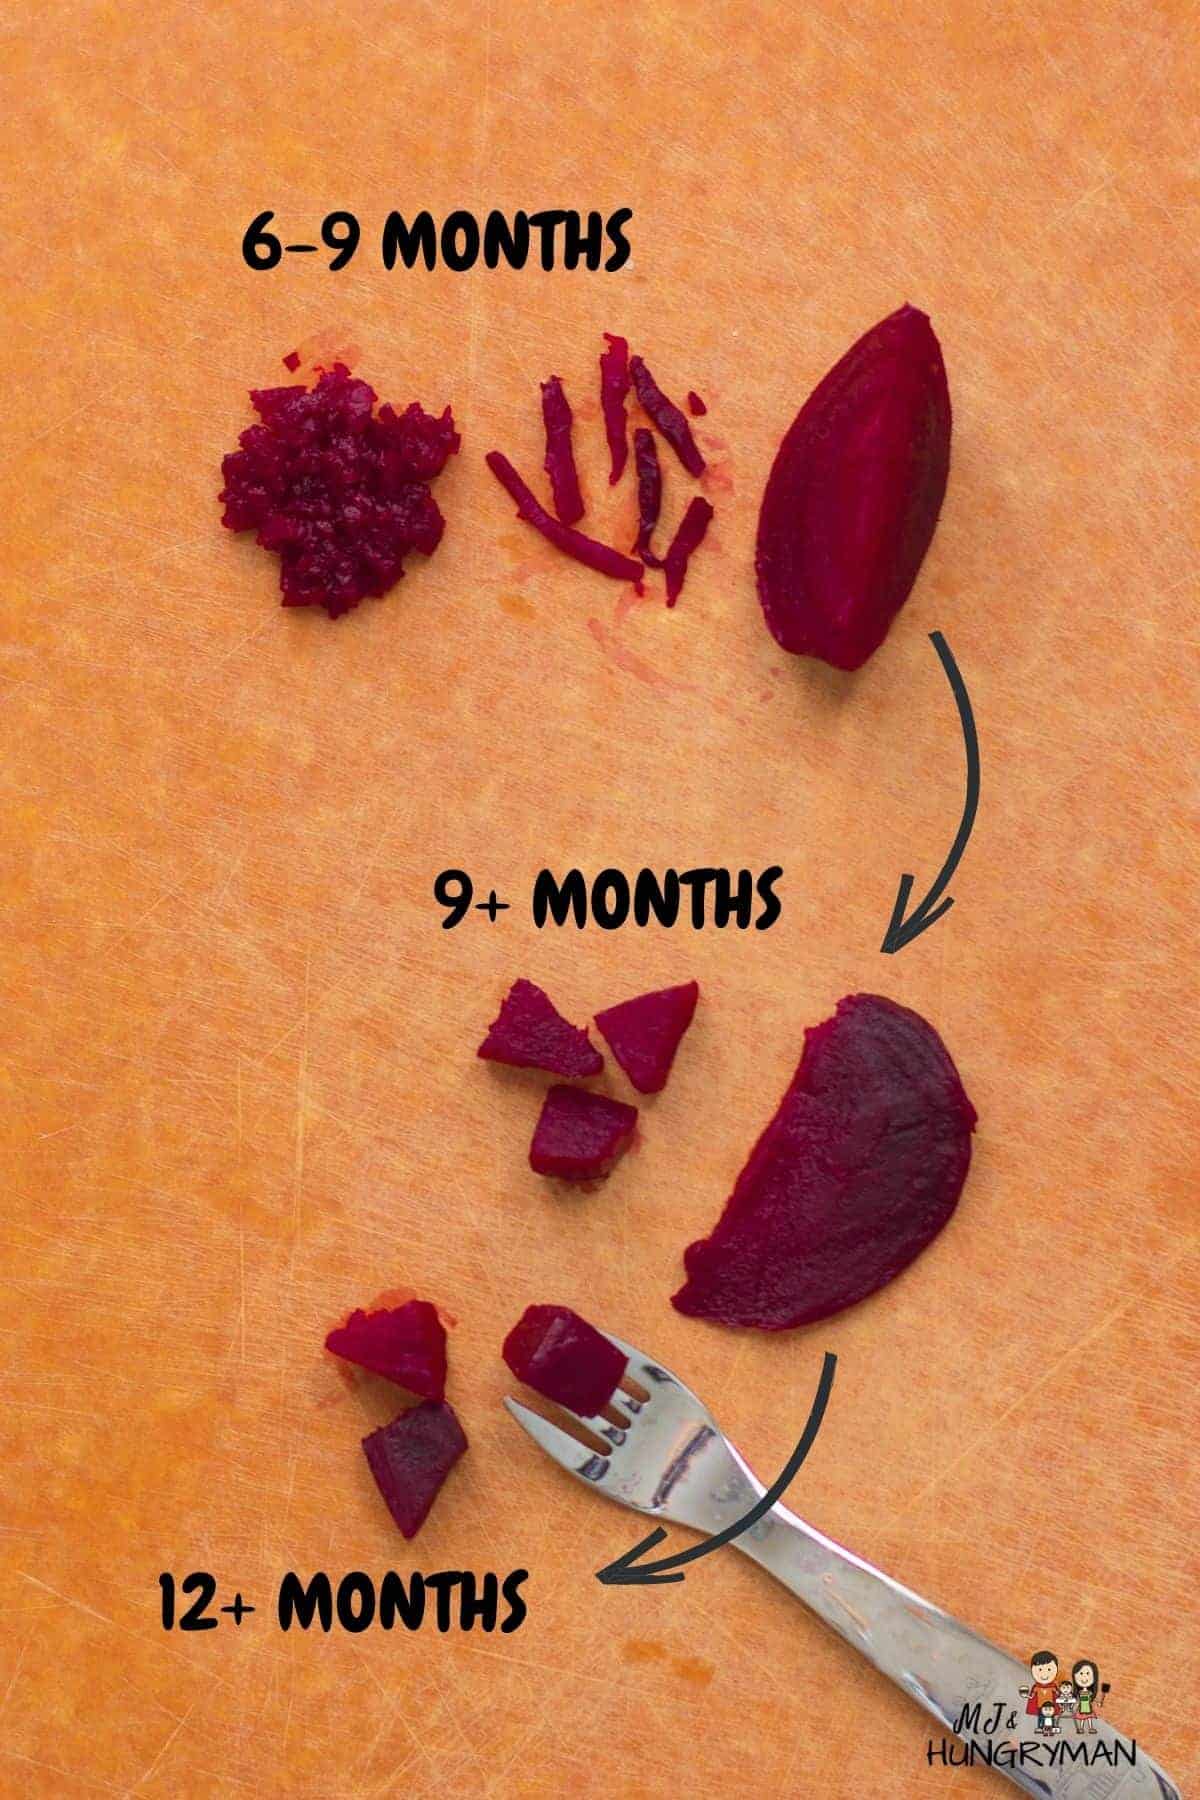 a graphic showing how to cut beetroot for 6-9 months old, 9+ months and 12+ months old.